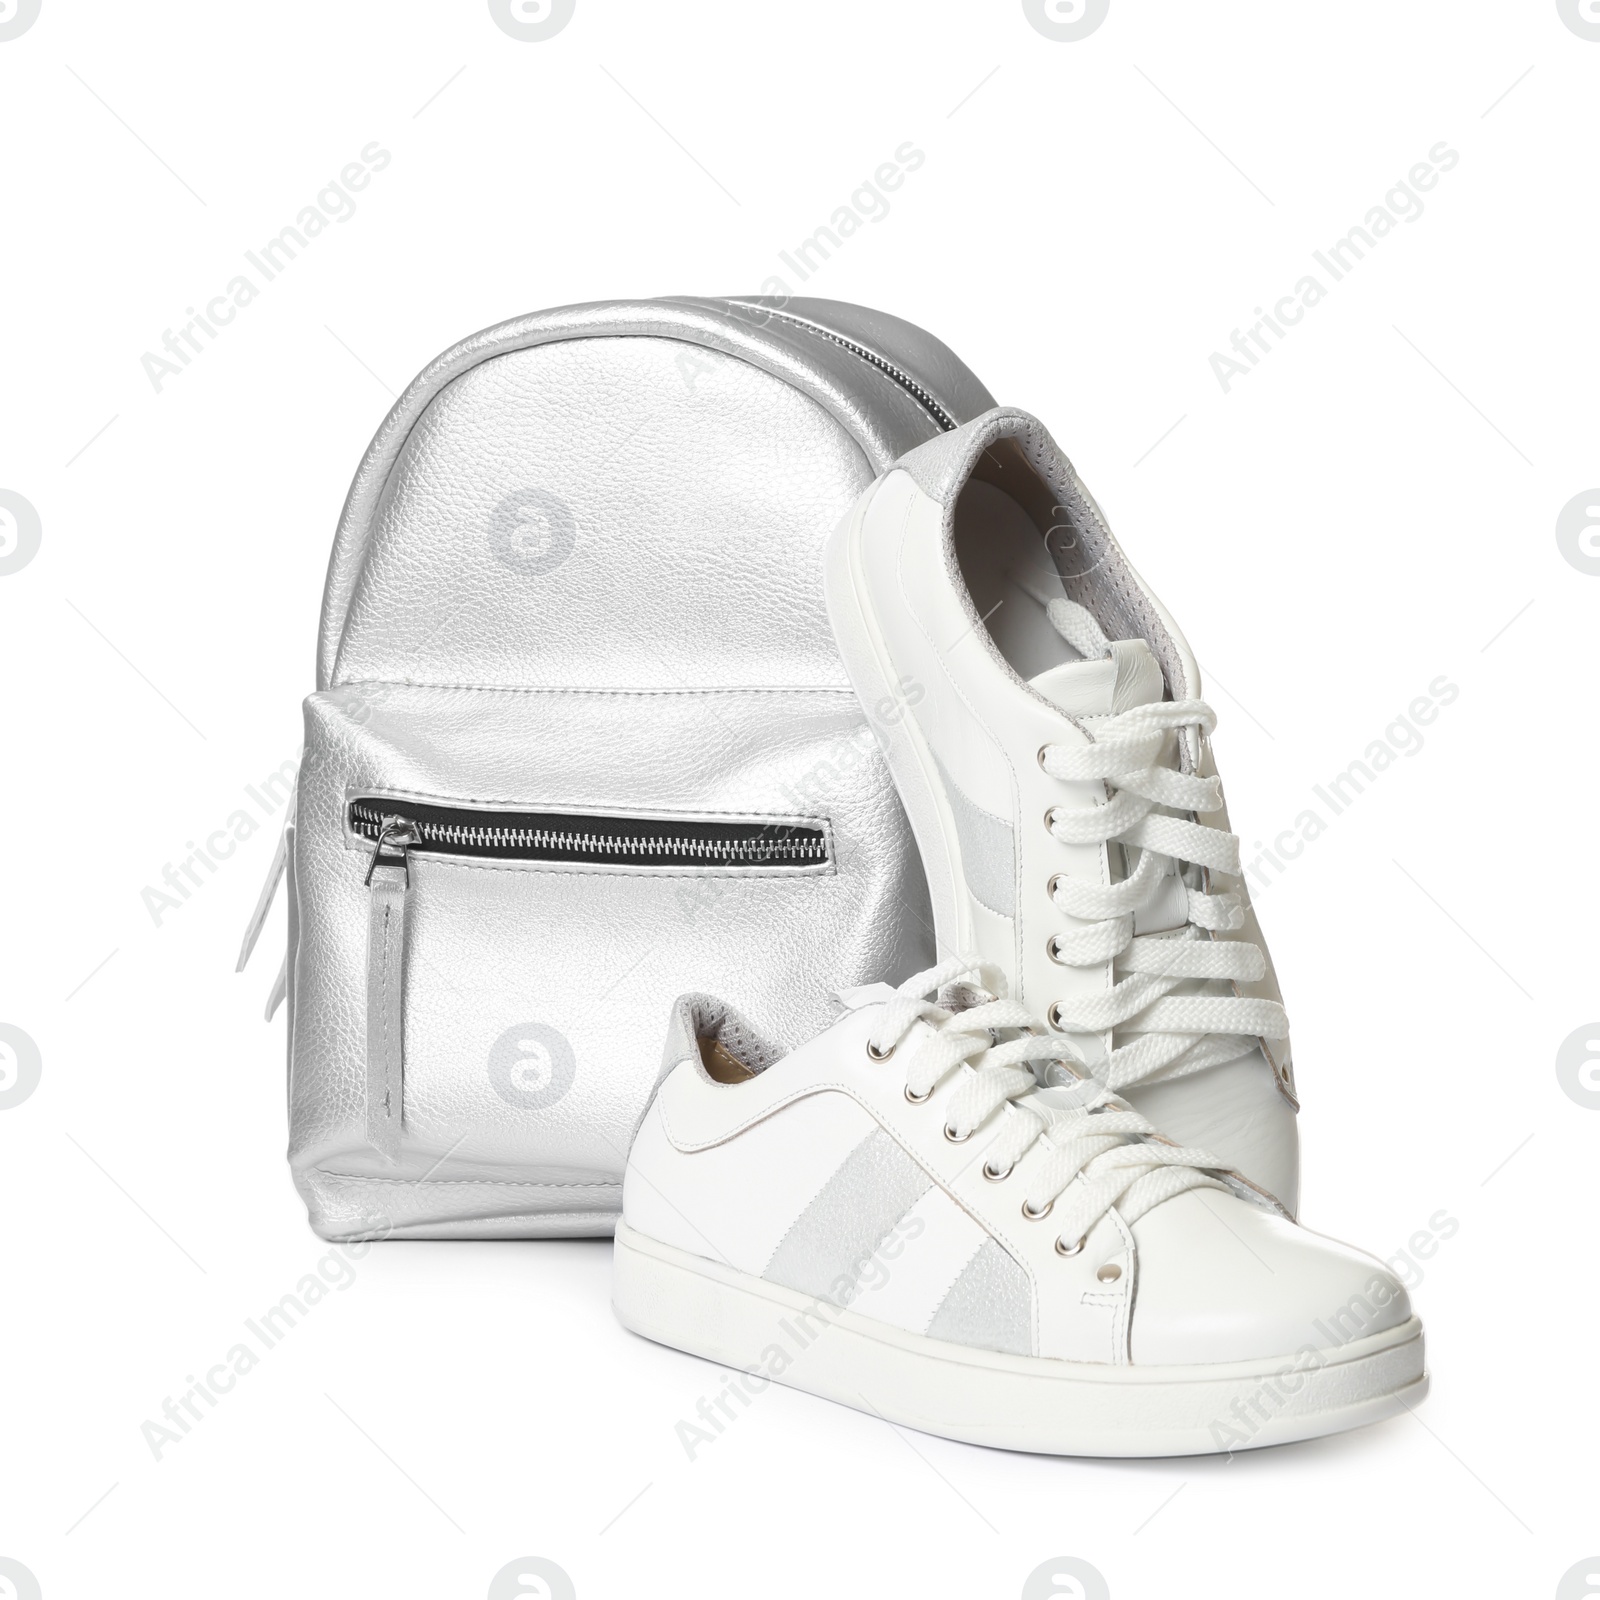 Photo of Pair of modern shoes and stylish backpack on white background